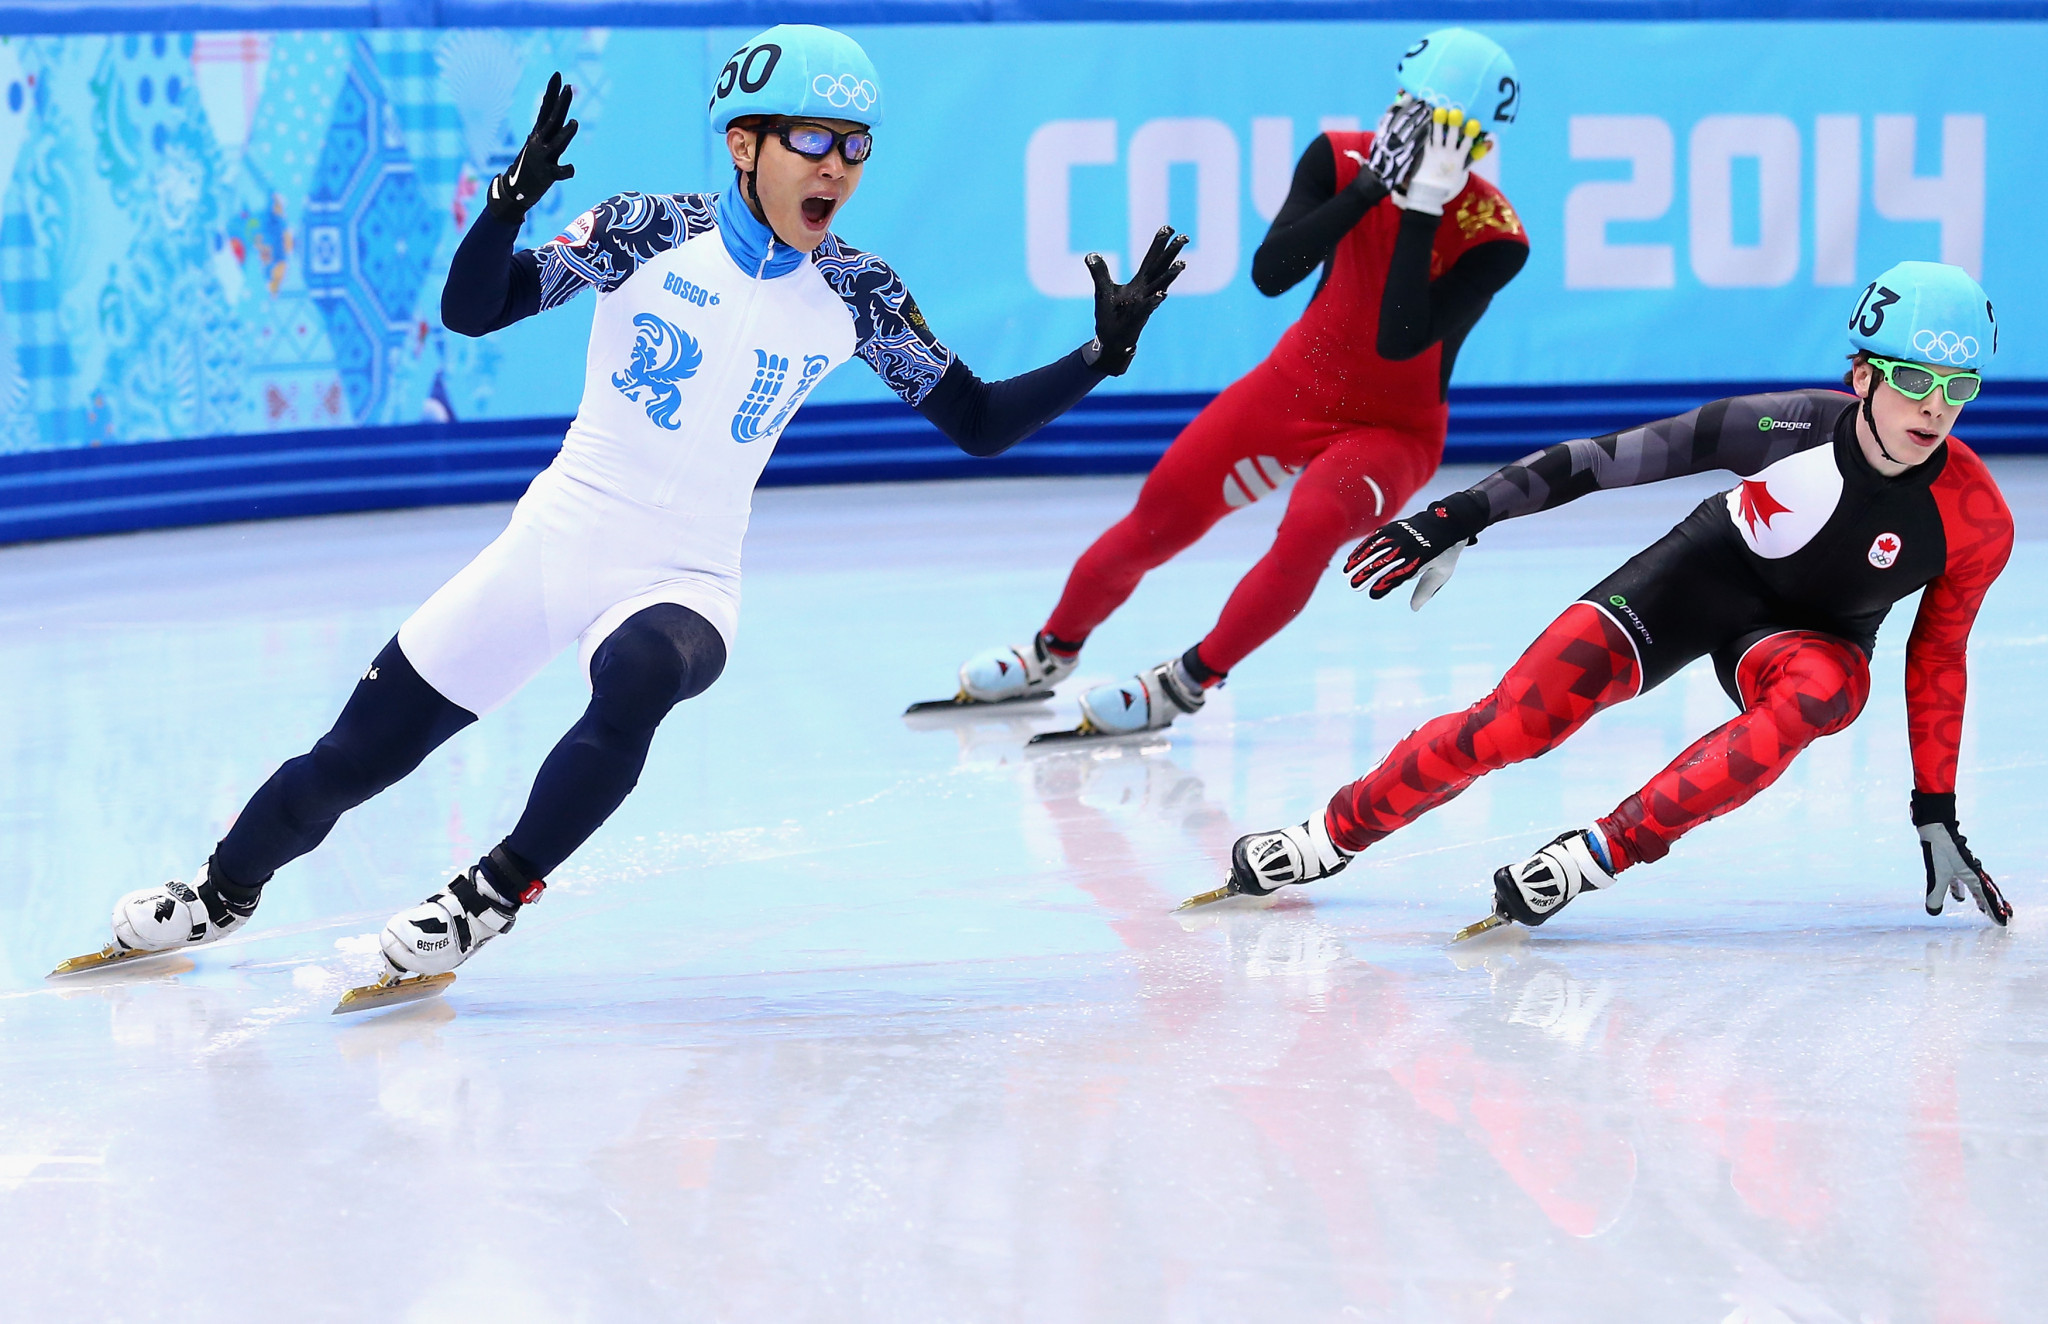 Six-time champion Viktor Ahn is the most decorated short track speed skater in Olympic history ©Getty Images